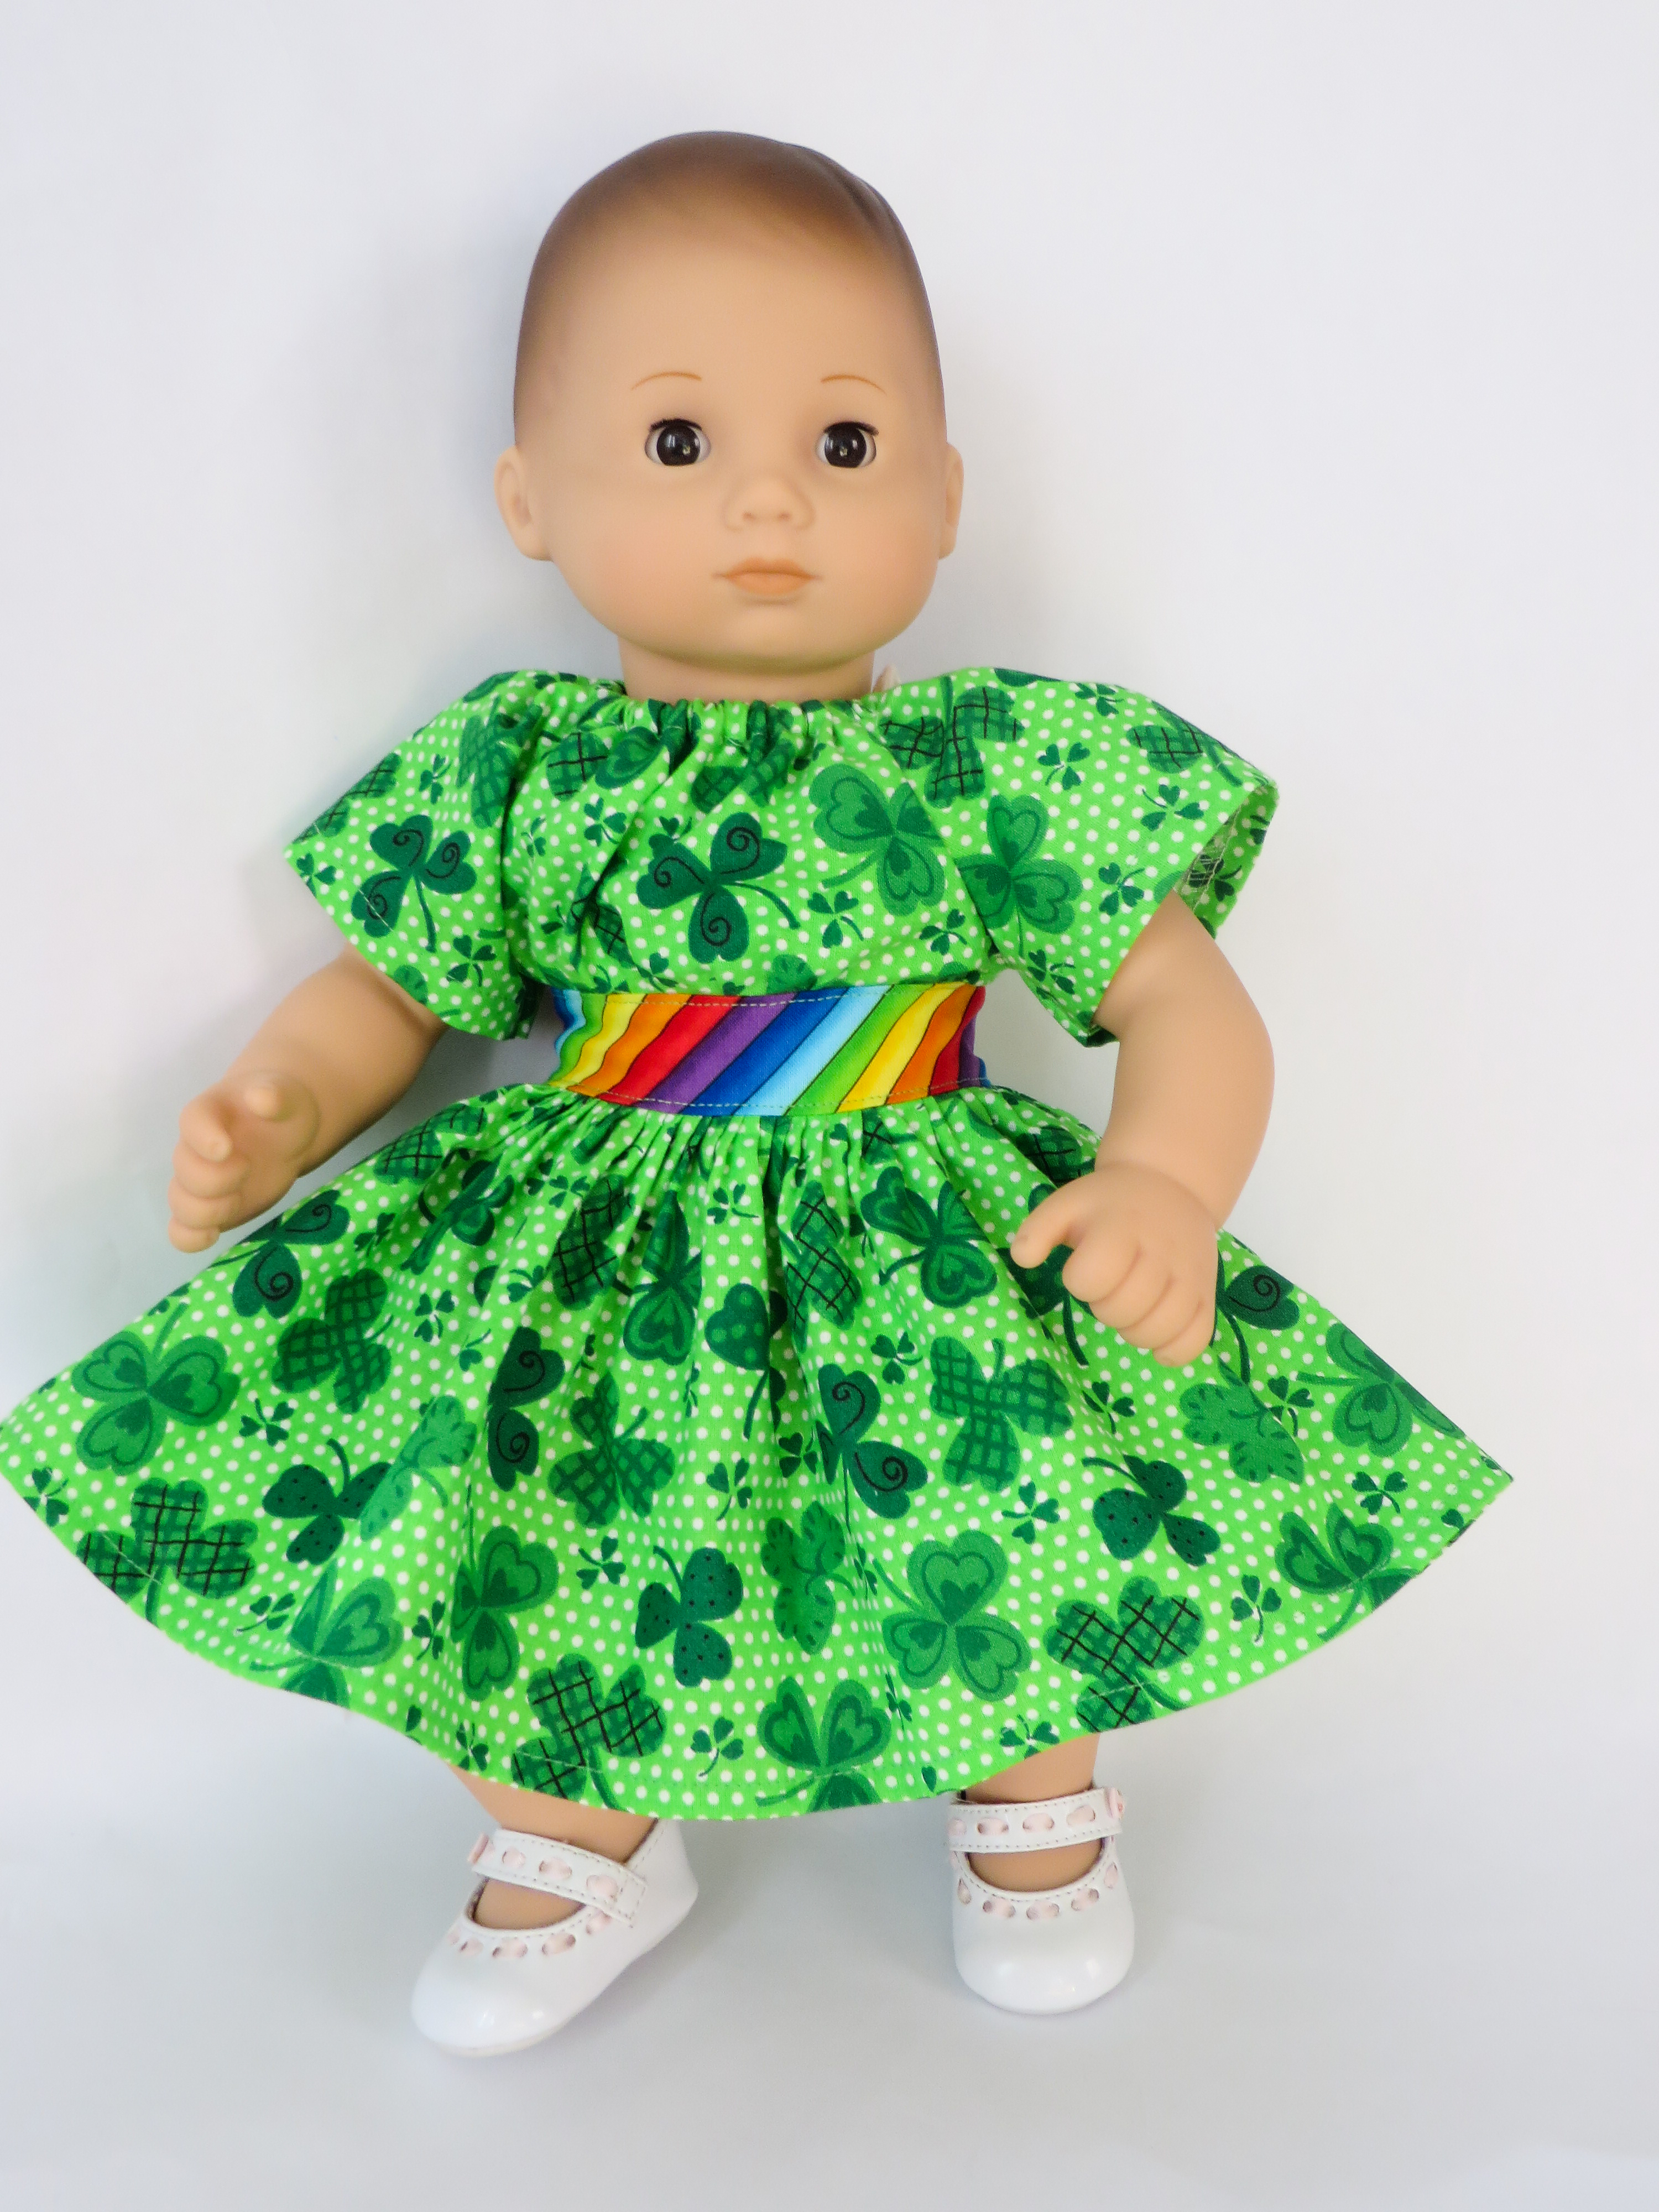 Sew up a lucky shamrock dress for your doll with this very easy sewing pattern from Oh Sew Kat! Designs. Quick and easy PDF doll patterns. Find a free skirt pattern at www.ohsewkat.com. #stpatricksday #dollclothes #irish #shamrock